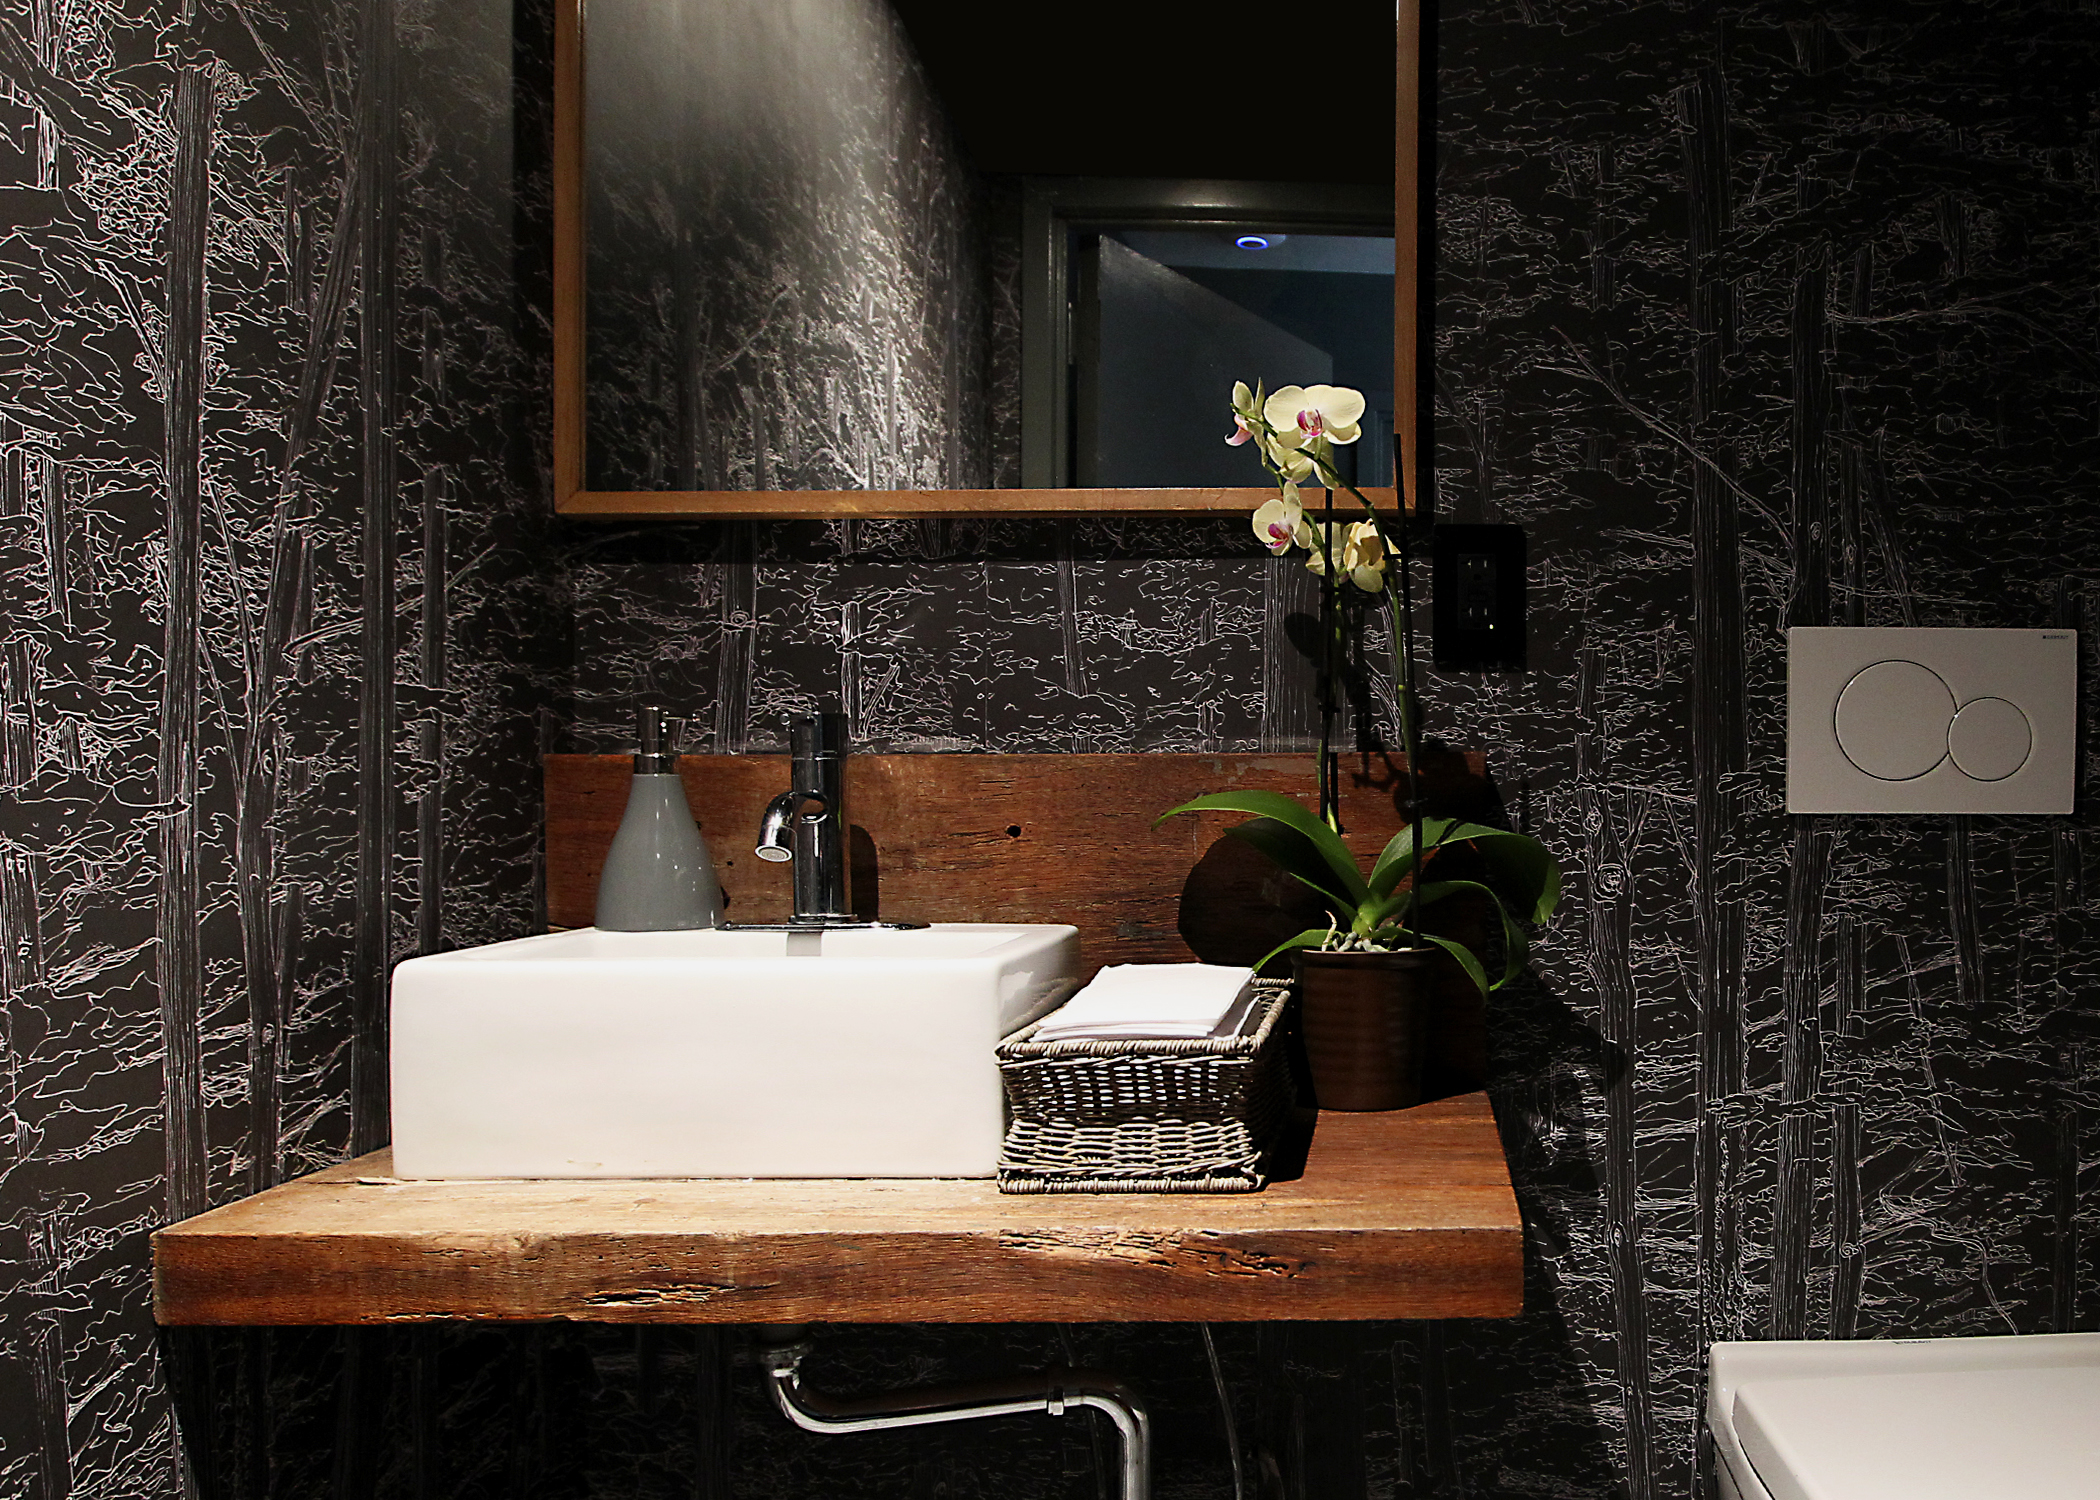 The bathrooms, refreshed with a new, unique, custom-designed wall paper to all walls and ceilings, create an ablutions experience unlike any other in NYC.